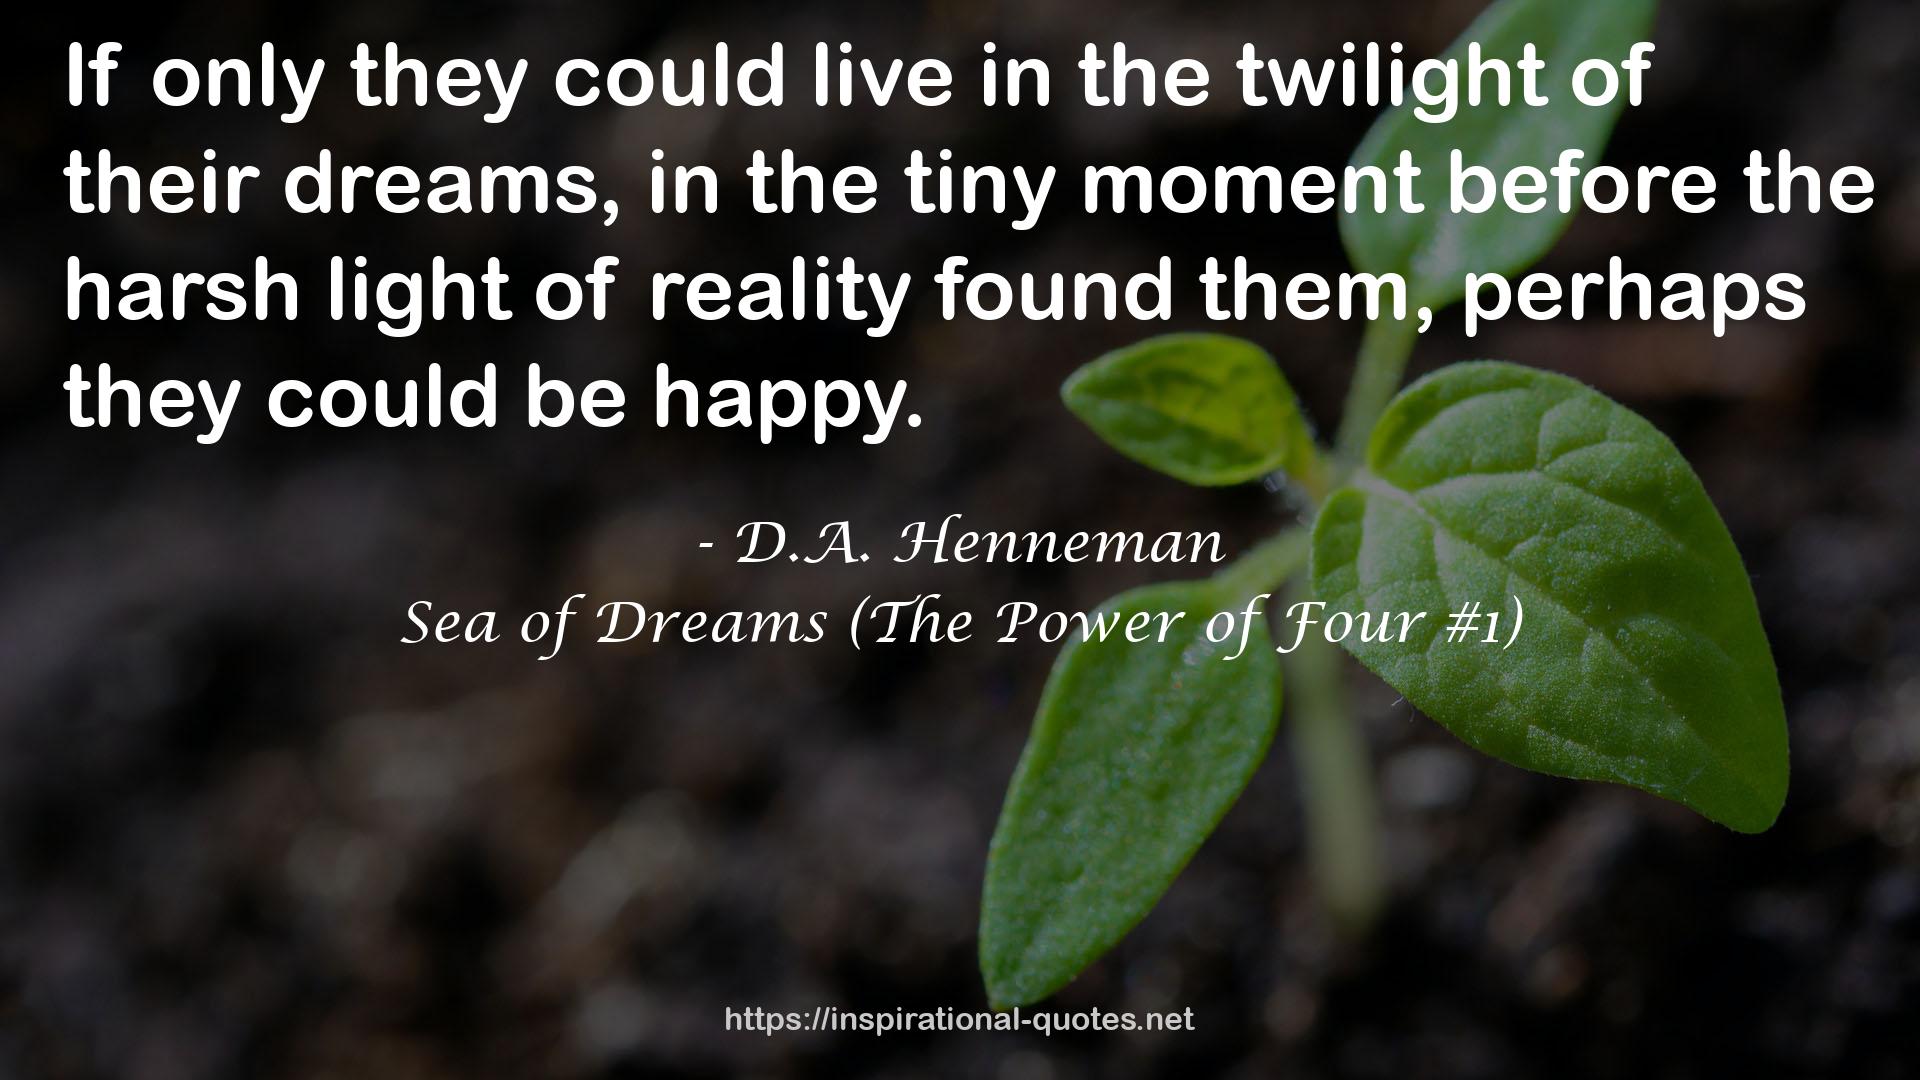 Sea of Dreams (The Power of Four #1) QUOTES